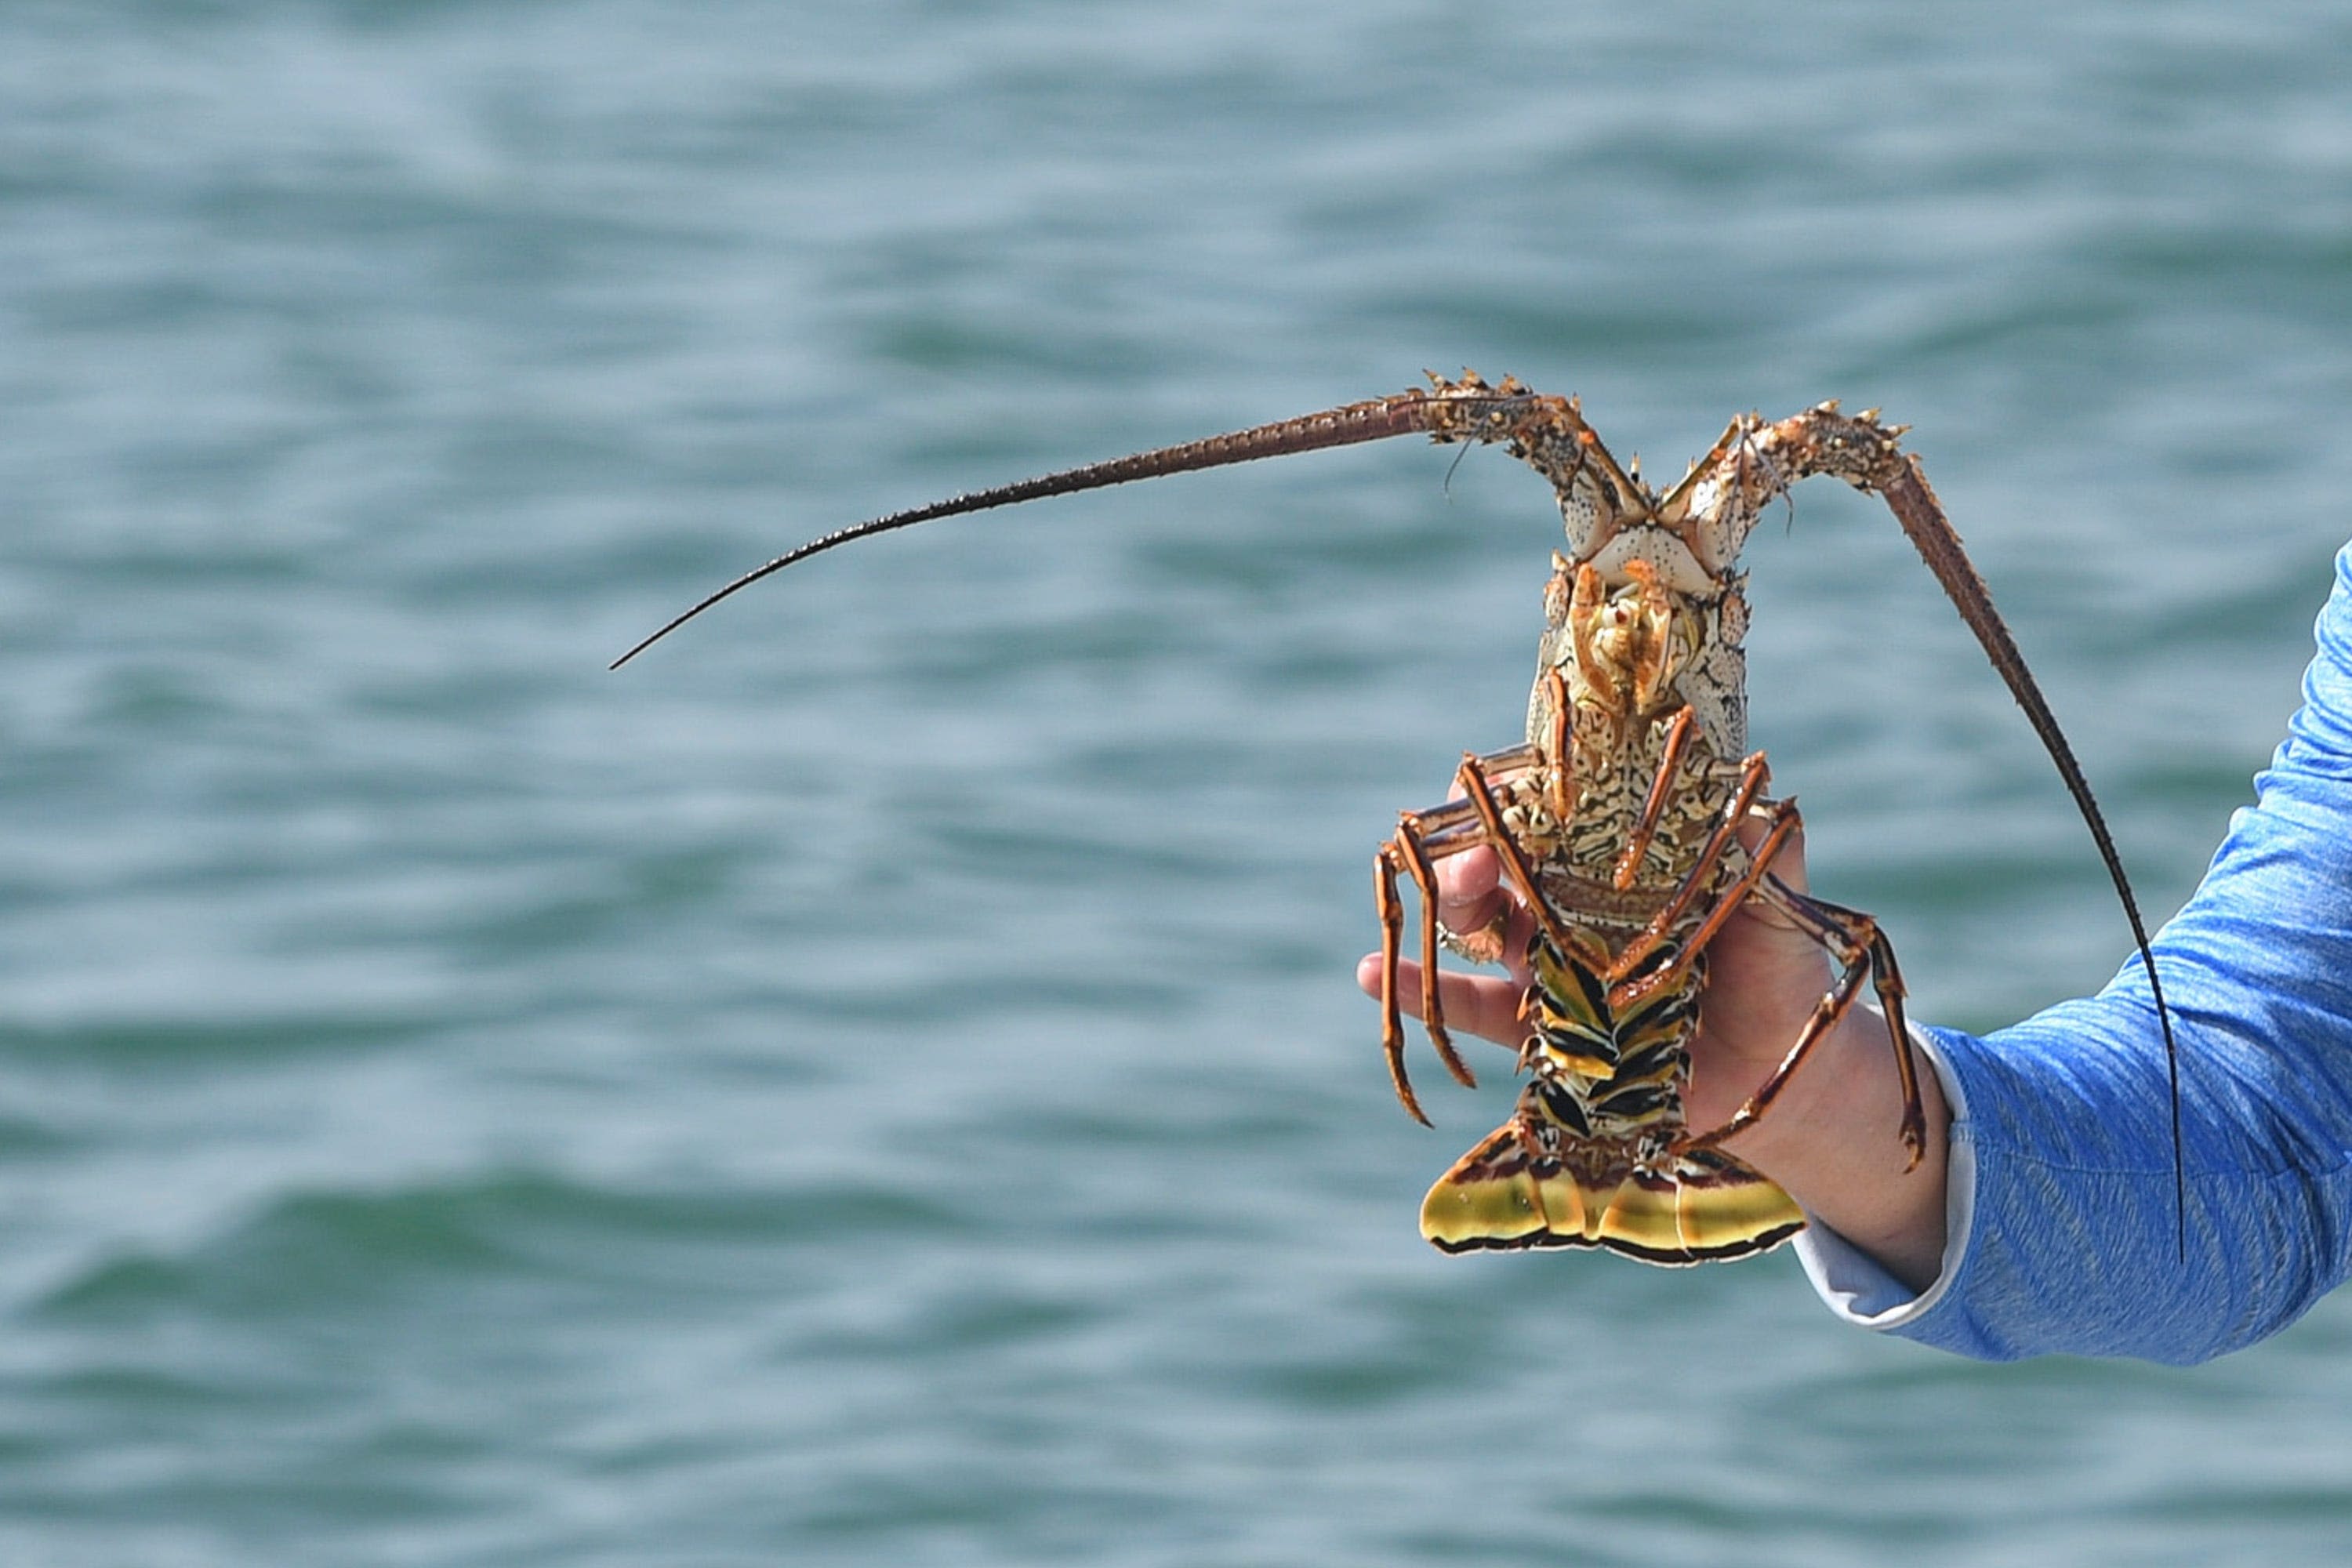 An extra day to harvest spiny lobsters is coming to Florida. Here's what to know